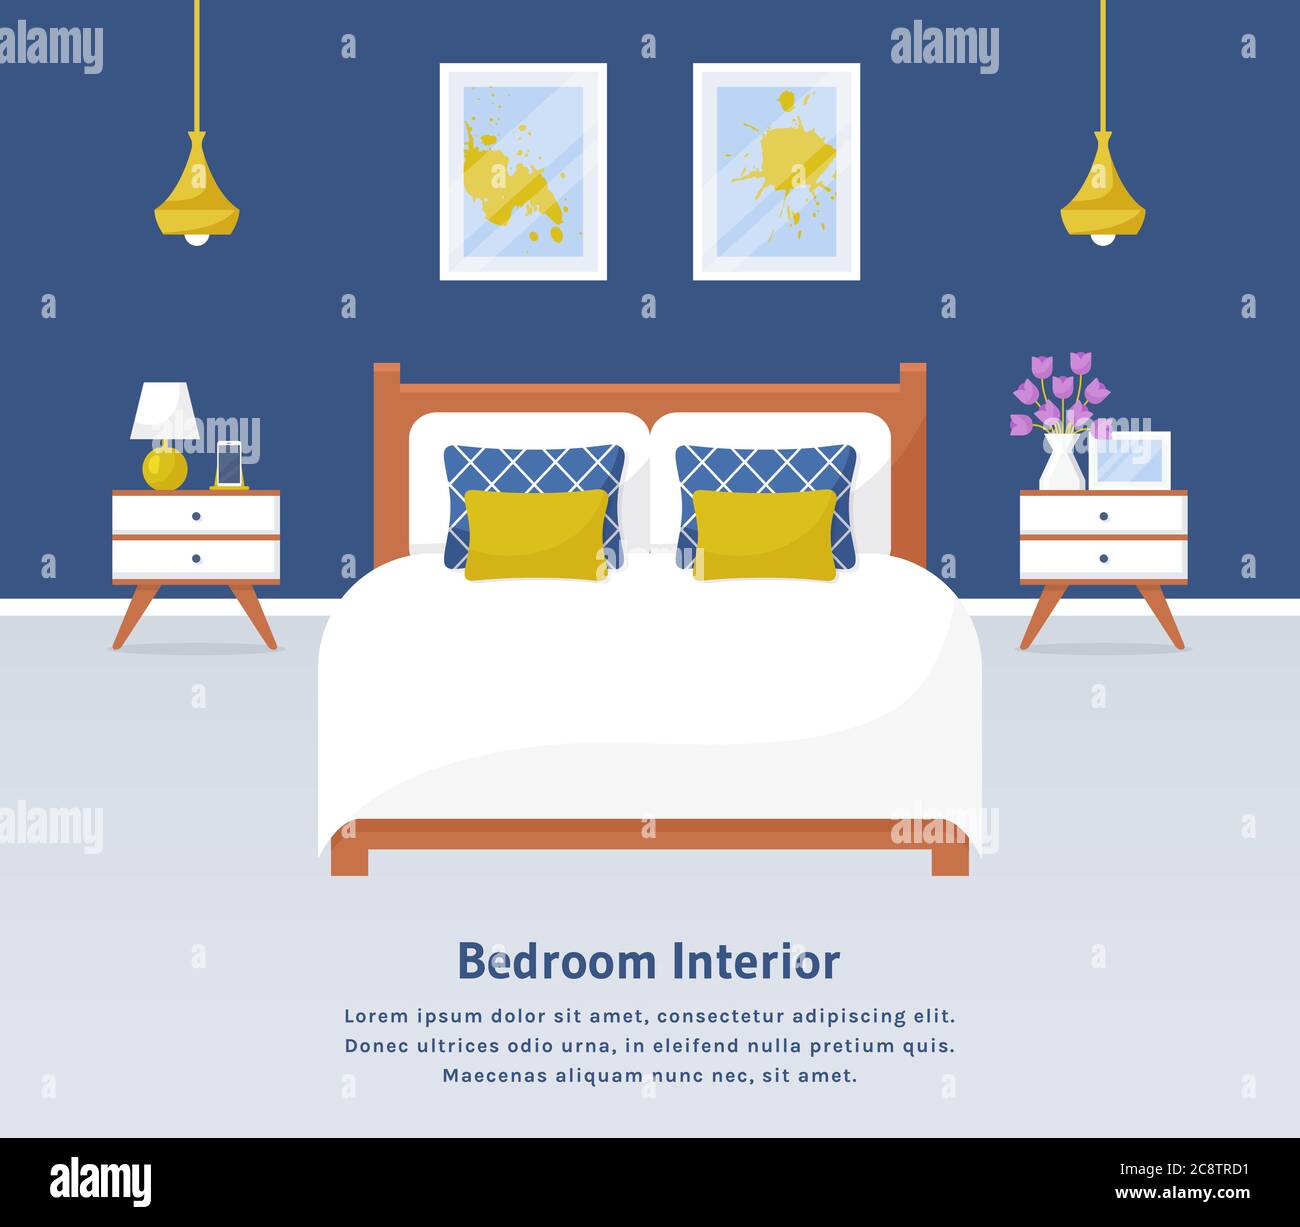 Bedroom interior. Vector web banner with place for text. Modern room design with double bed, bedside tables, and decor accessories. Home furnishings. Stock Vector